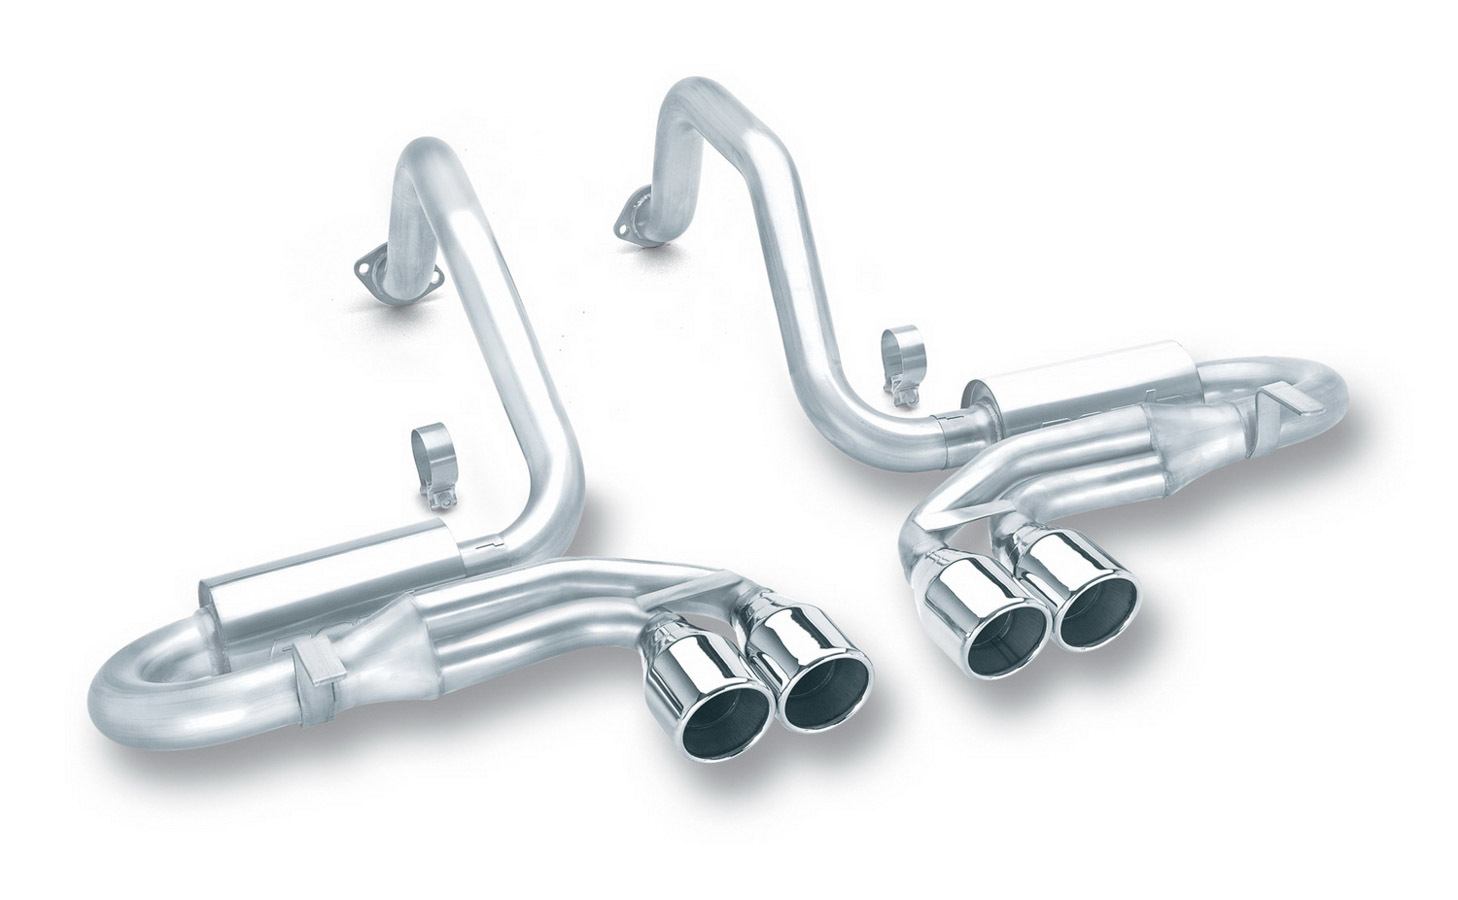 Borla 140038 Exhaust System, S-Type, Cat-Back, 2-1/2 in Diameter, Dual Center Exit, Quad 4 in Polished Tips, Stainless, Natural, GM LS-Series, Chevy Corvette 1997-2004, Kit